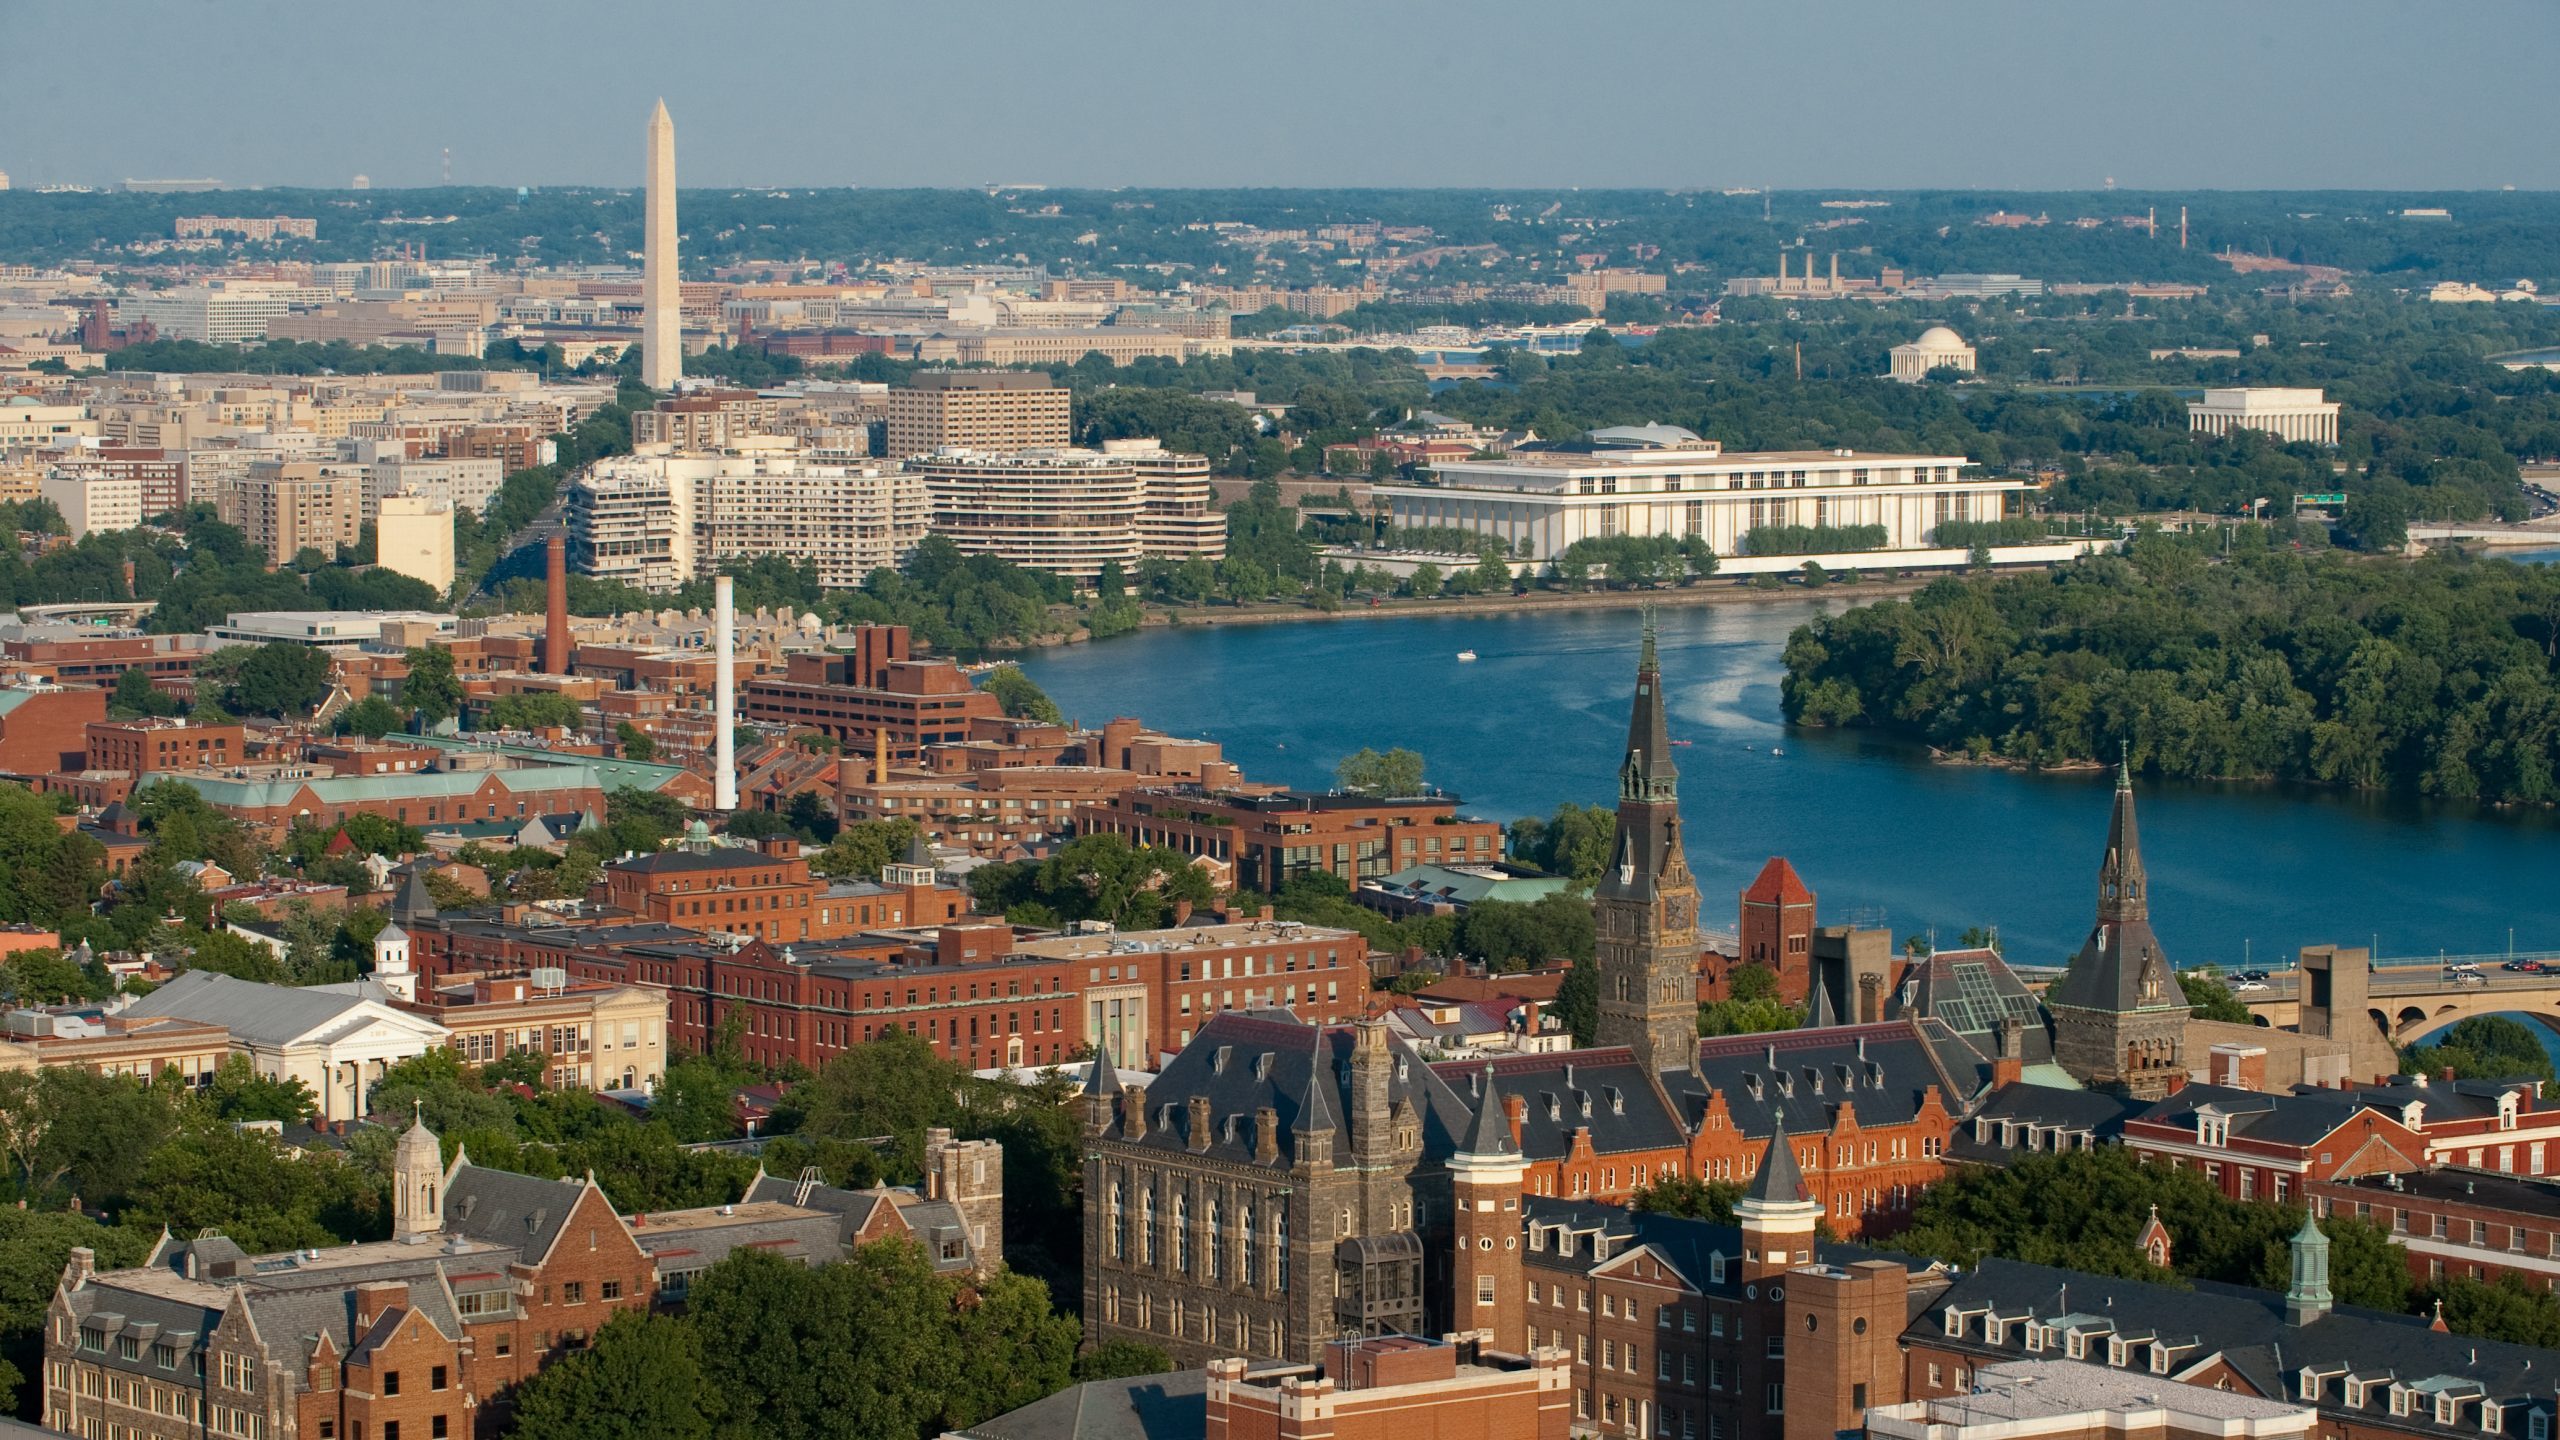 Aerial shot of Georgetown's campus in DC with Washington monument prominent in background